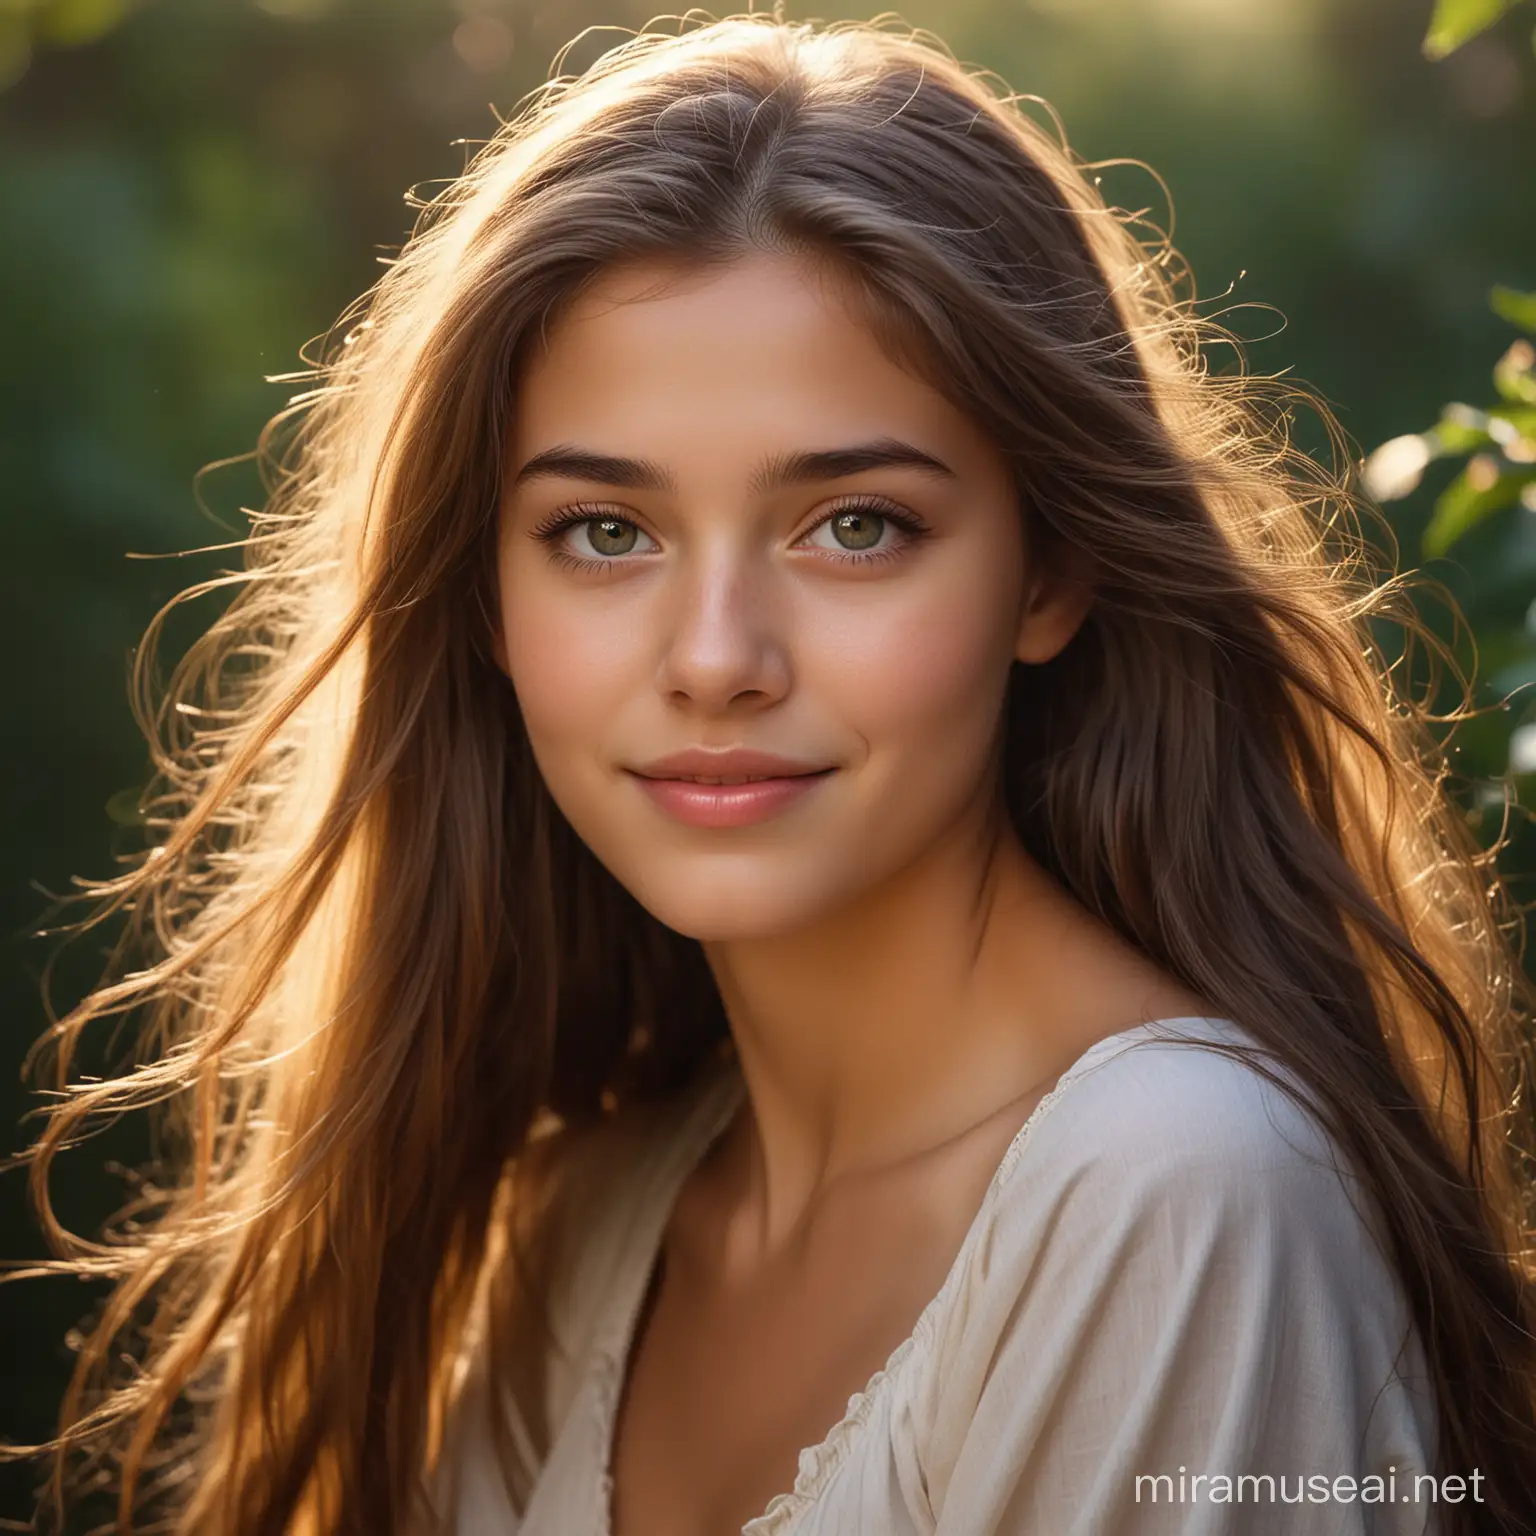 Confident Girl with Natural Beauty and Radiant Smile